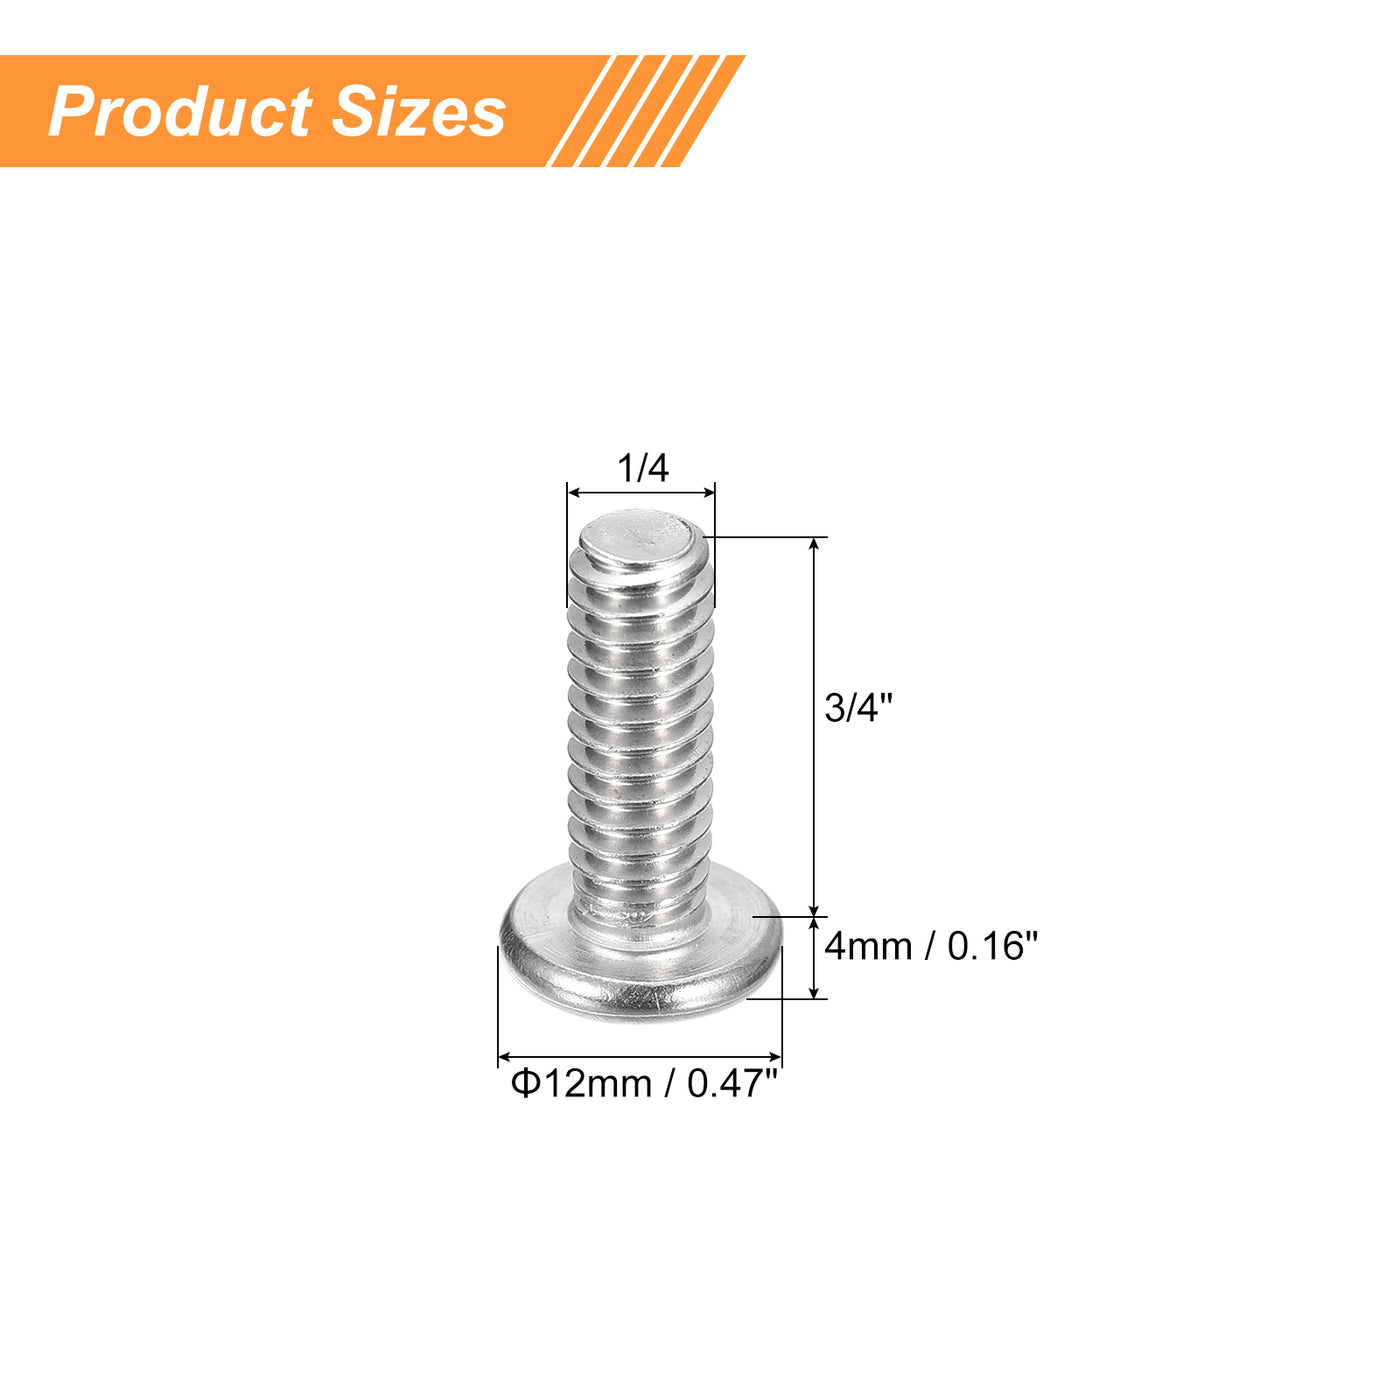 uxcell Uxcell 1/4-20x3/4" Pan Head Machine Screws, Stainless Steel 18-8 Screw, Pack of 50